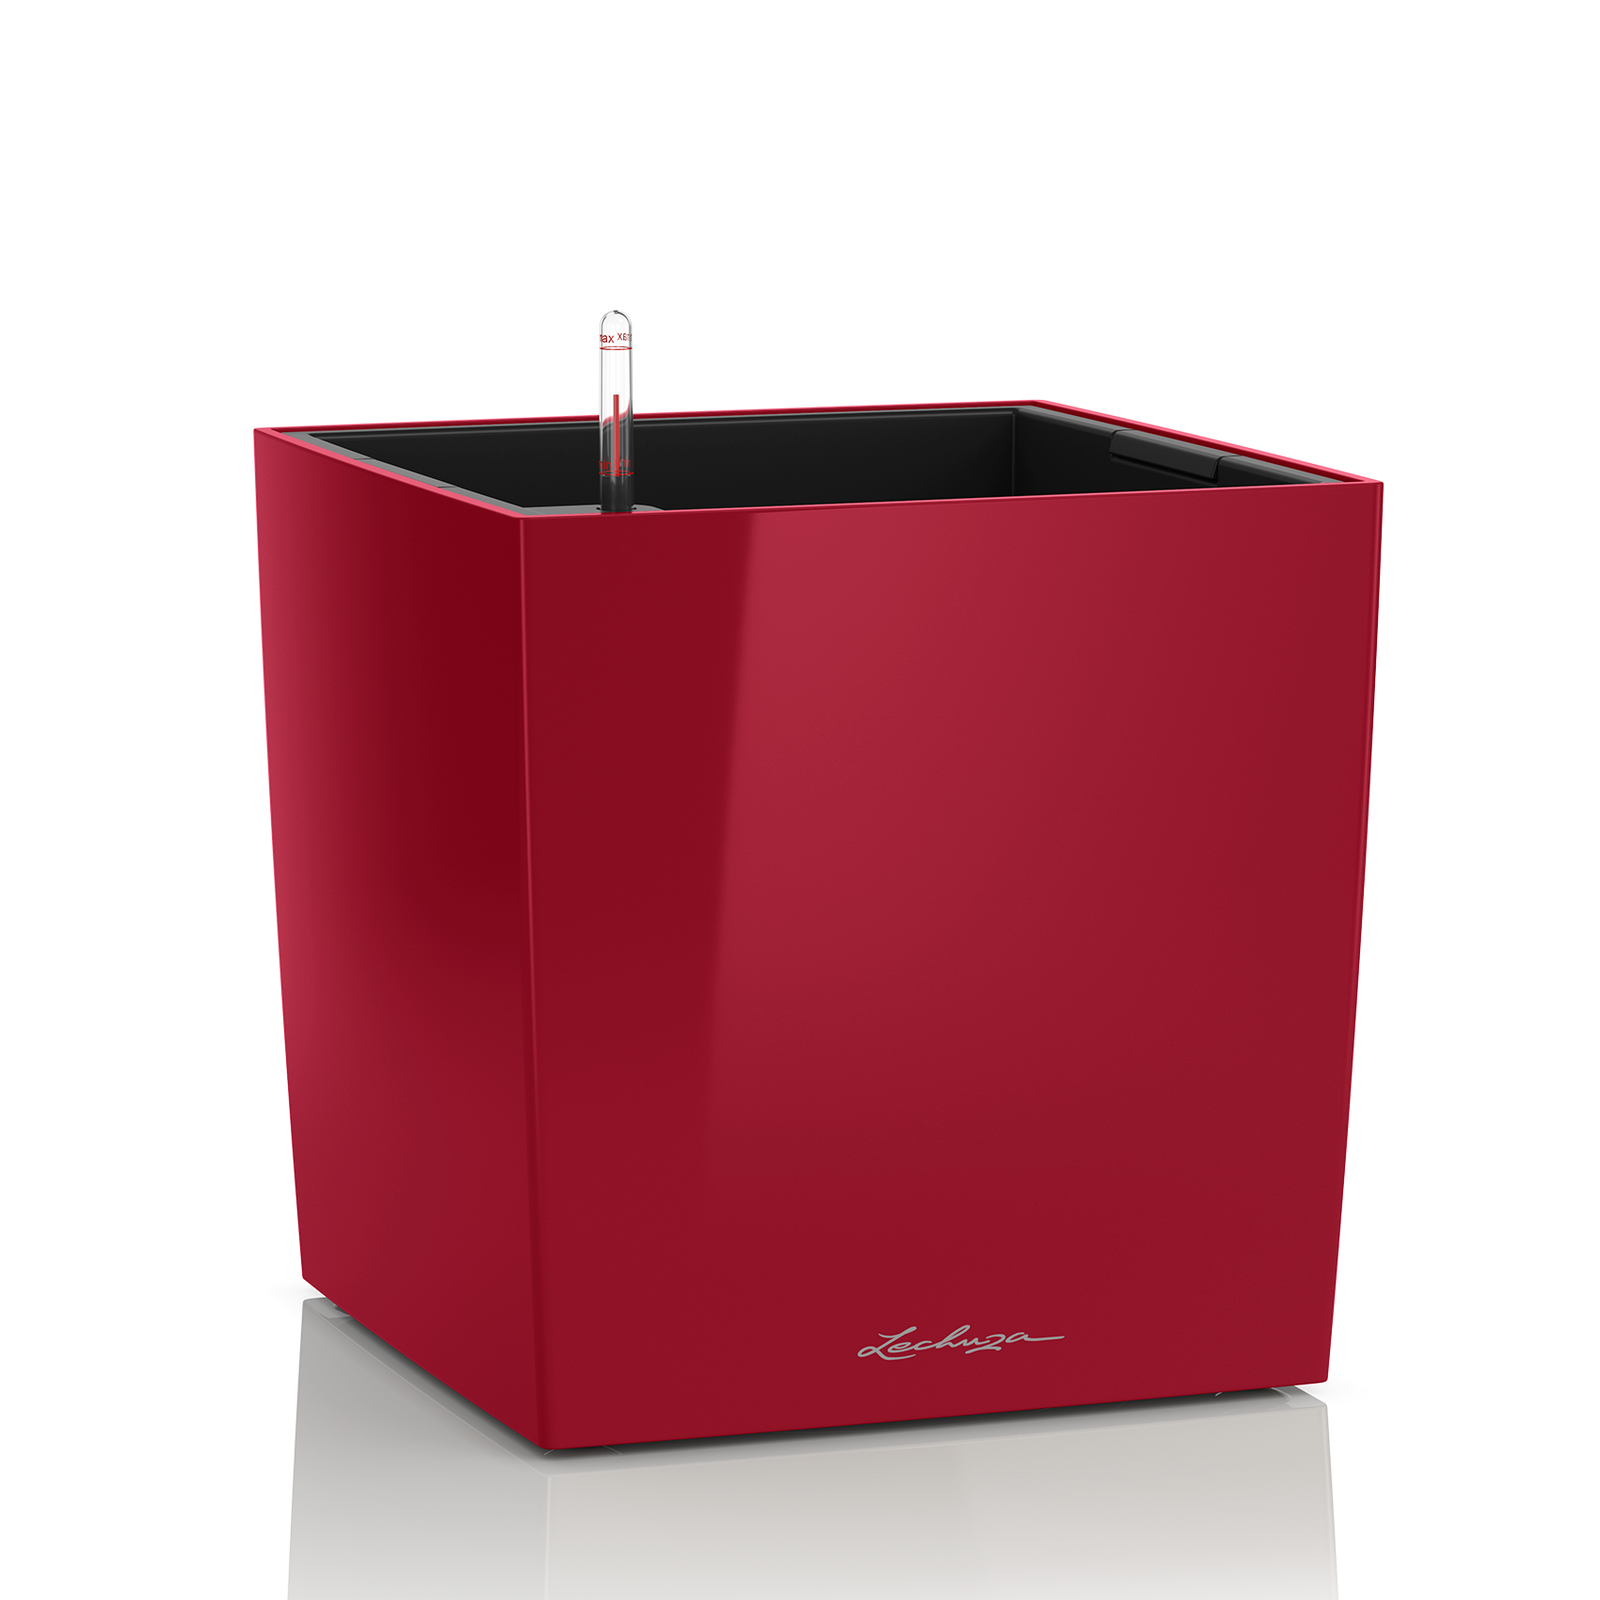 Lechuza Cube Plant Containers - Scarlet Red